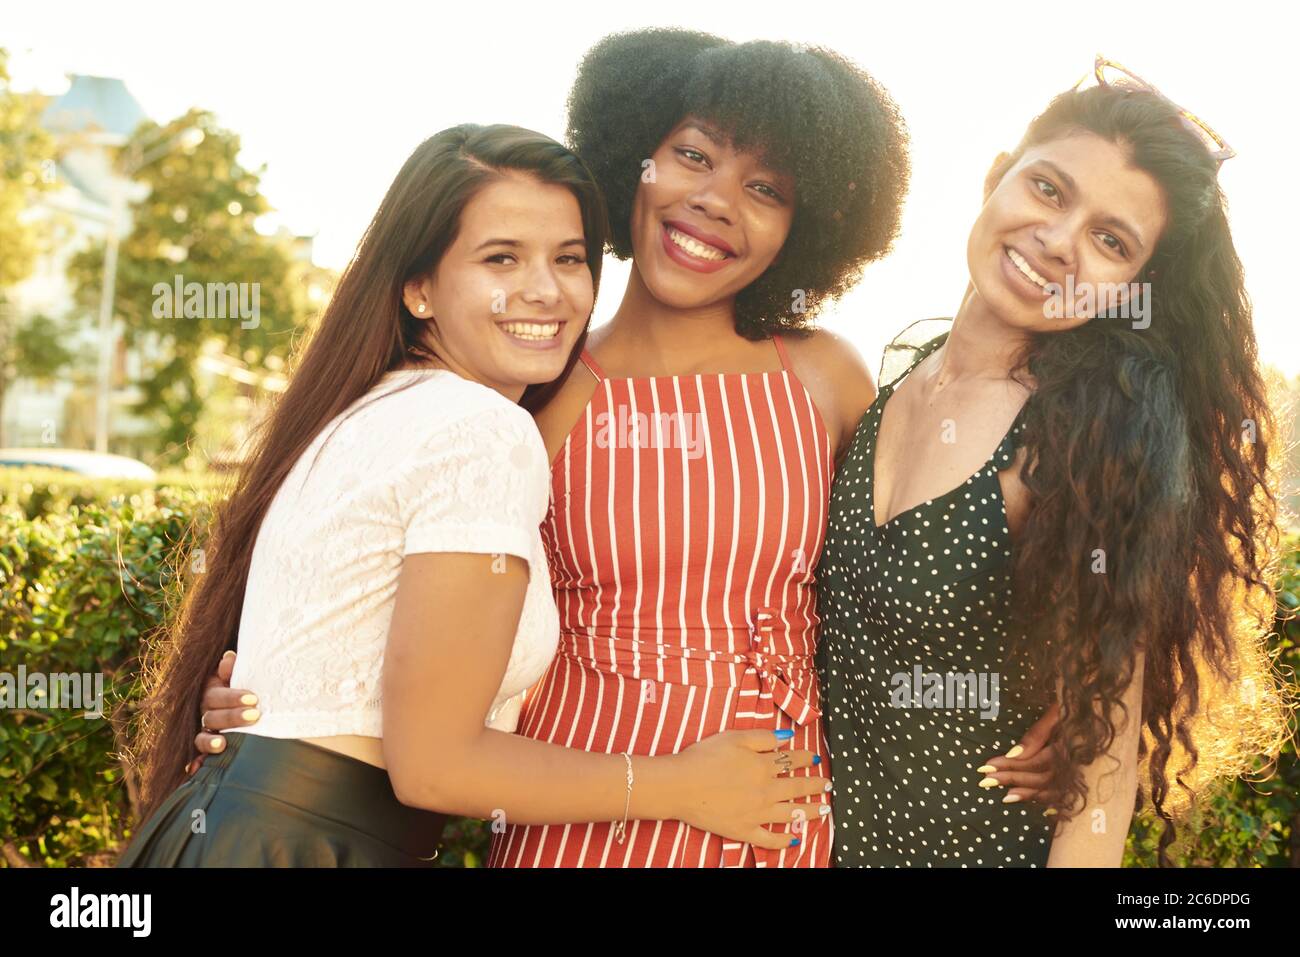 Three close girlfriends or sisters are hugging, standing in the city on a background of trees. The concept of female friendship and youth. Stock Photo